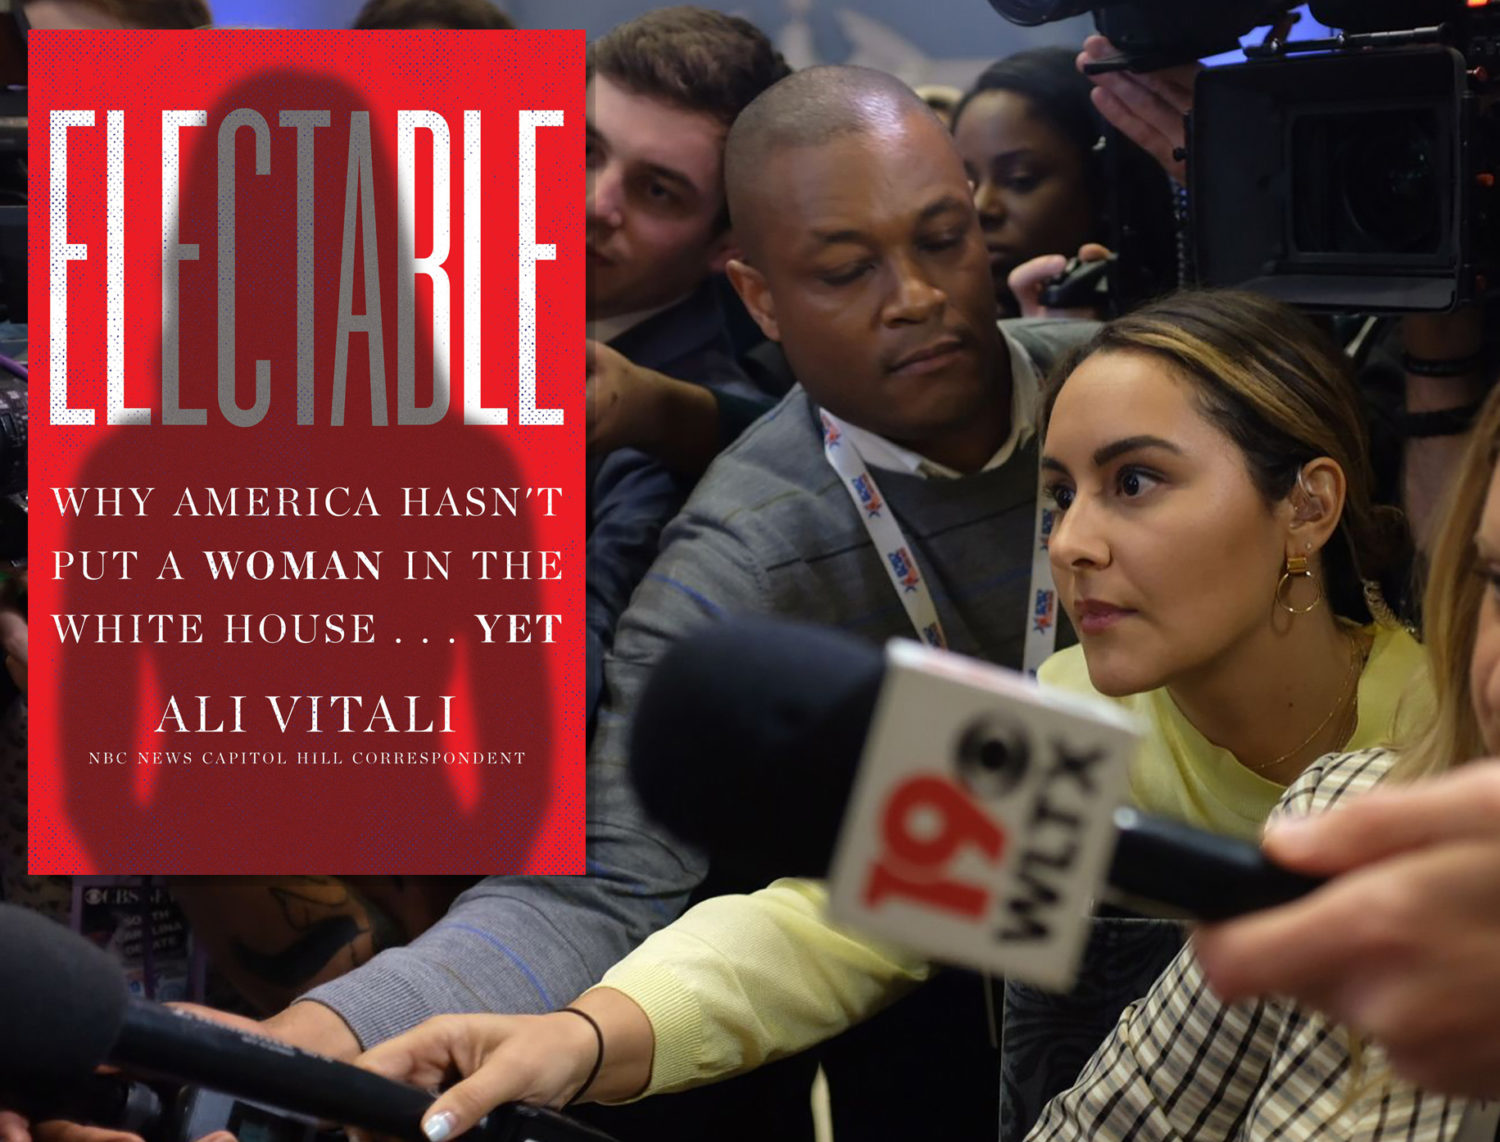 Journalist Ali Vitali is the author of "Electable: Why America Hasn't Put a Woman in the White House ... Yet"